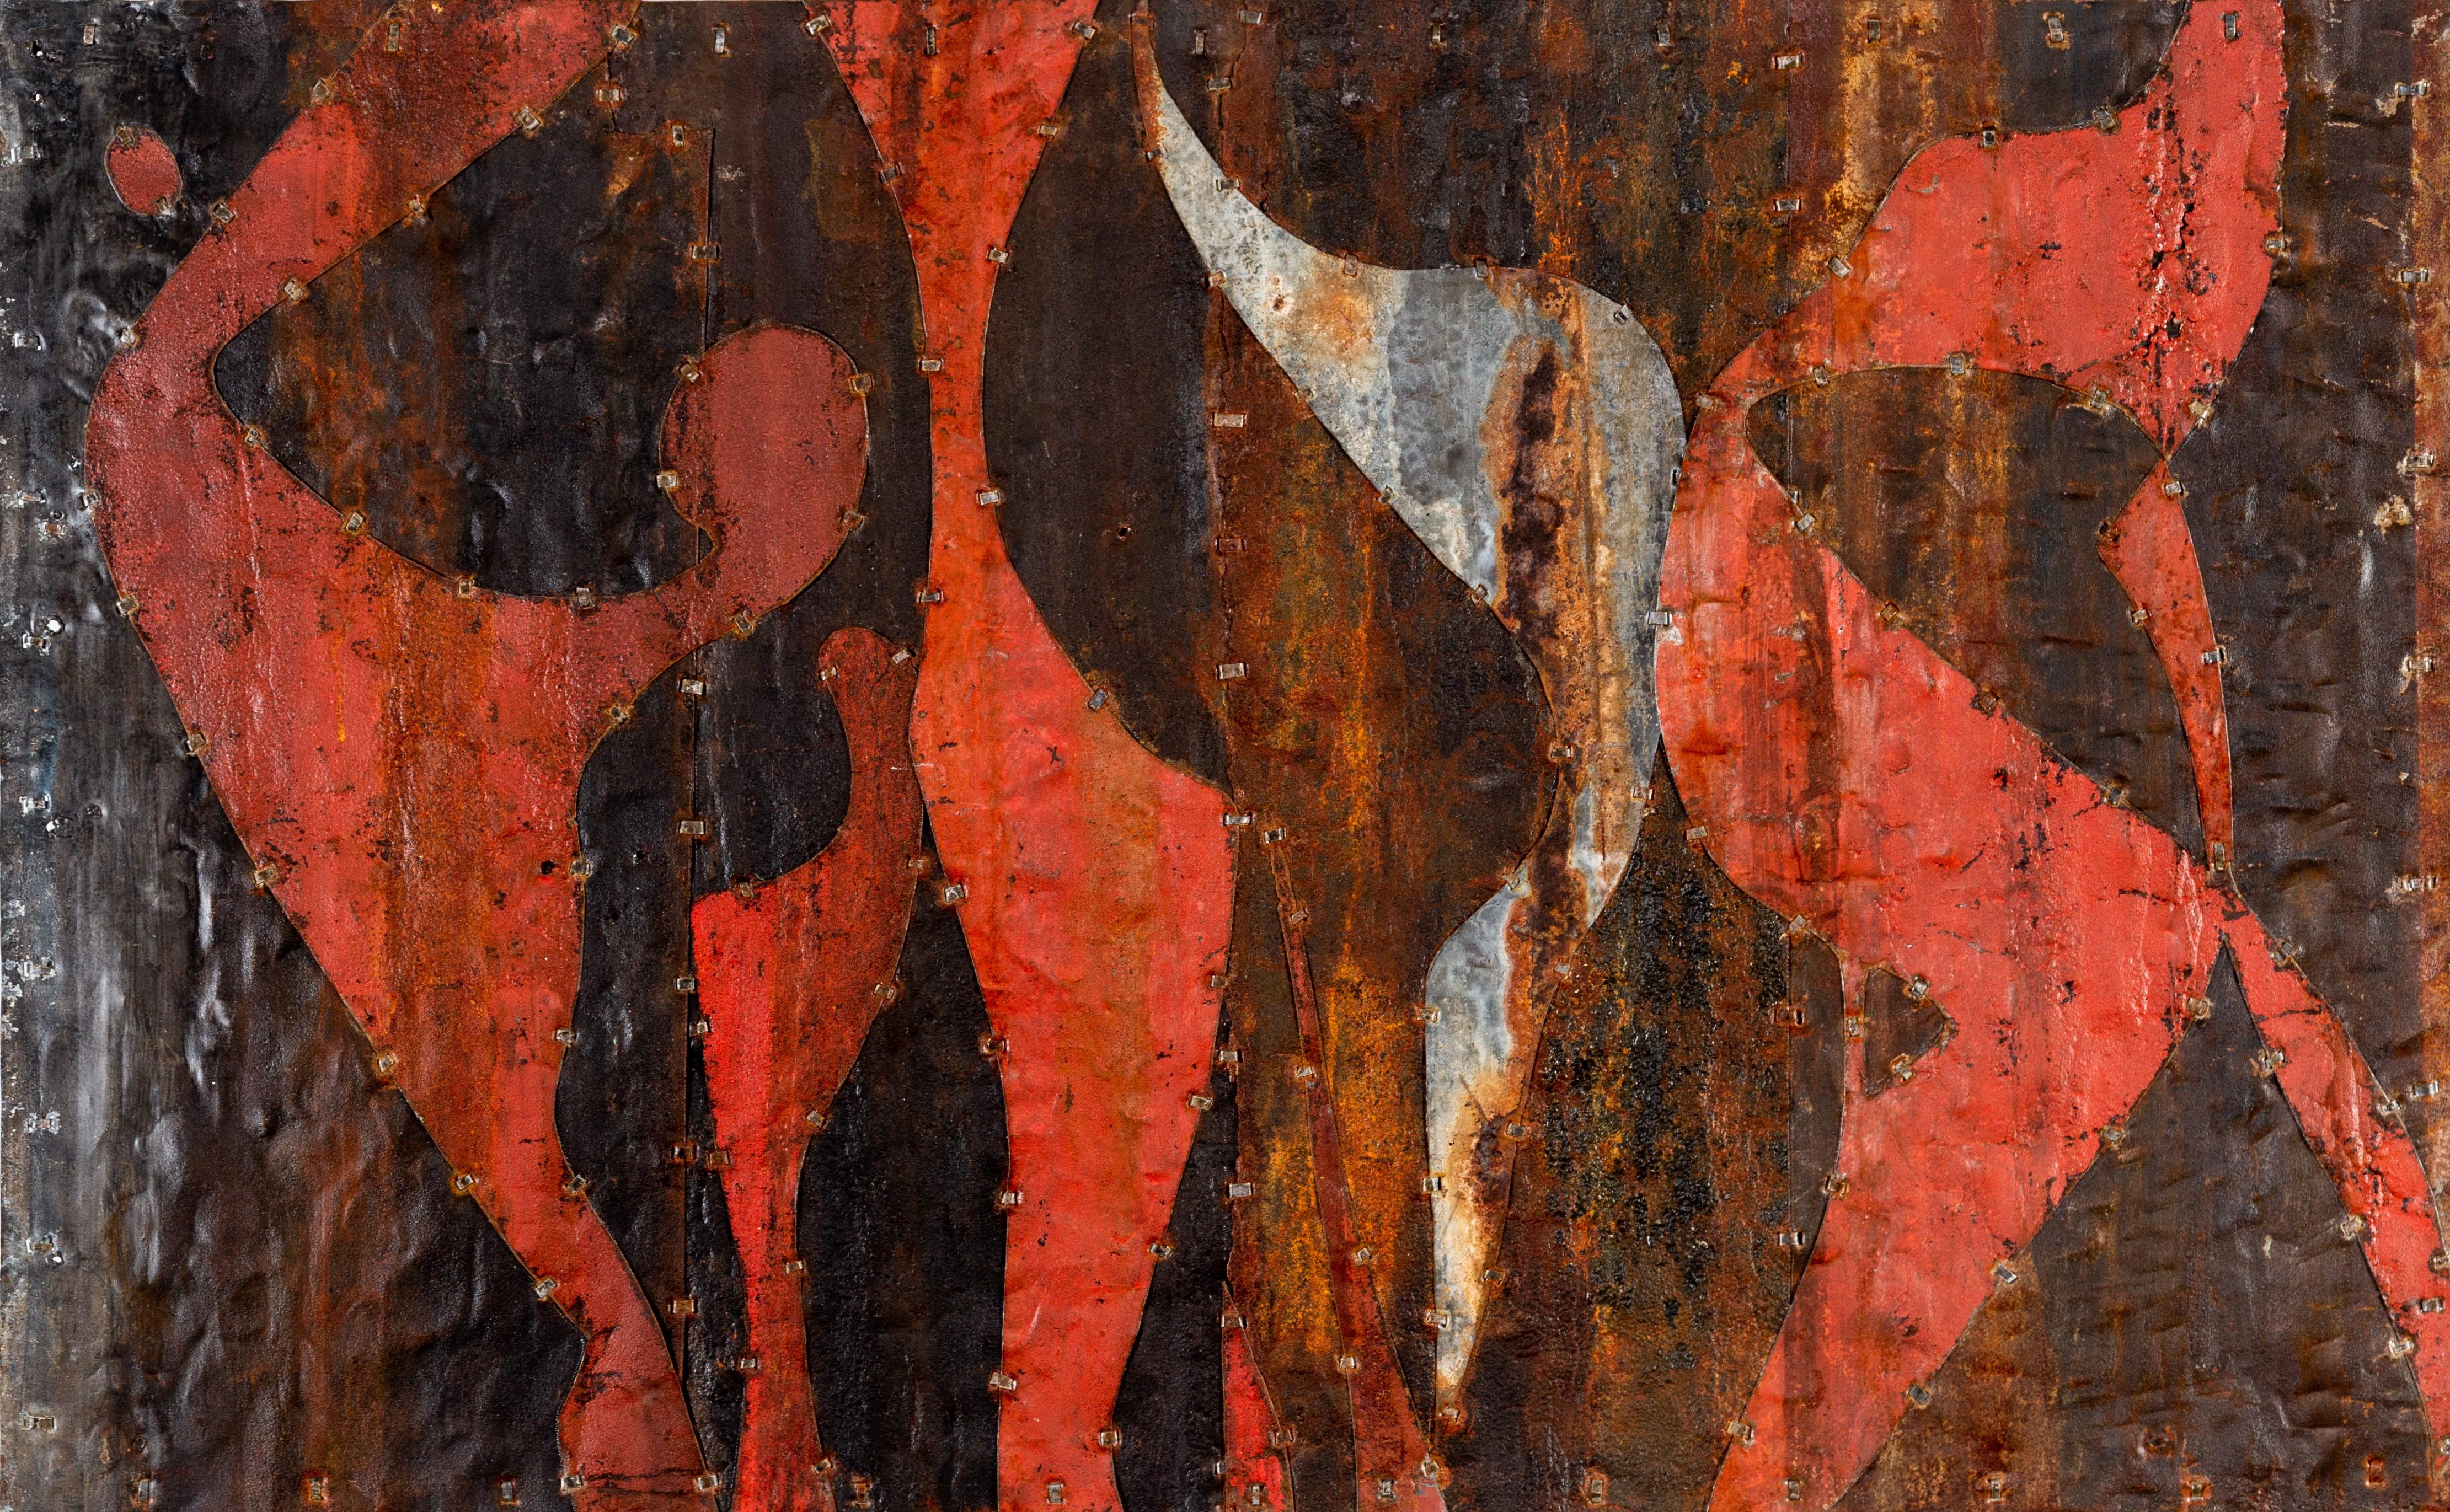 Mark Hilltout Abstract Painting - Large Abstract Rusted Metal Composition "Red Matisse Study"